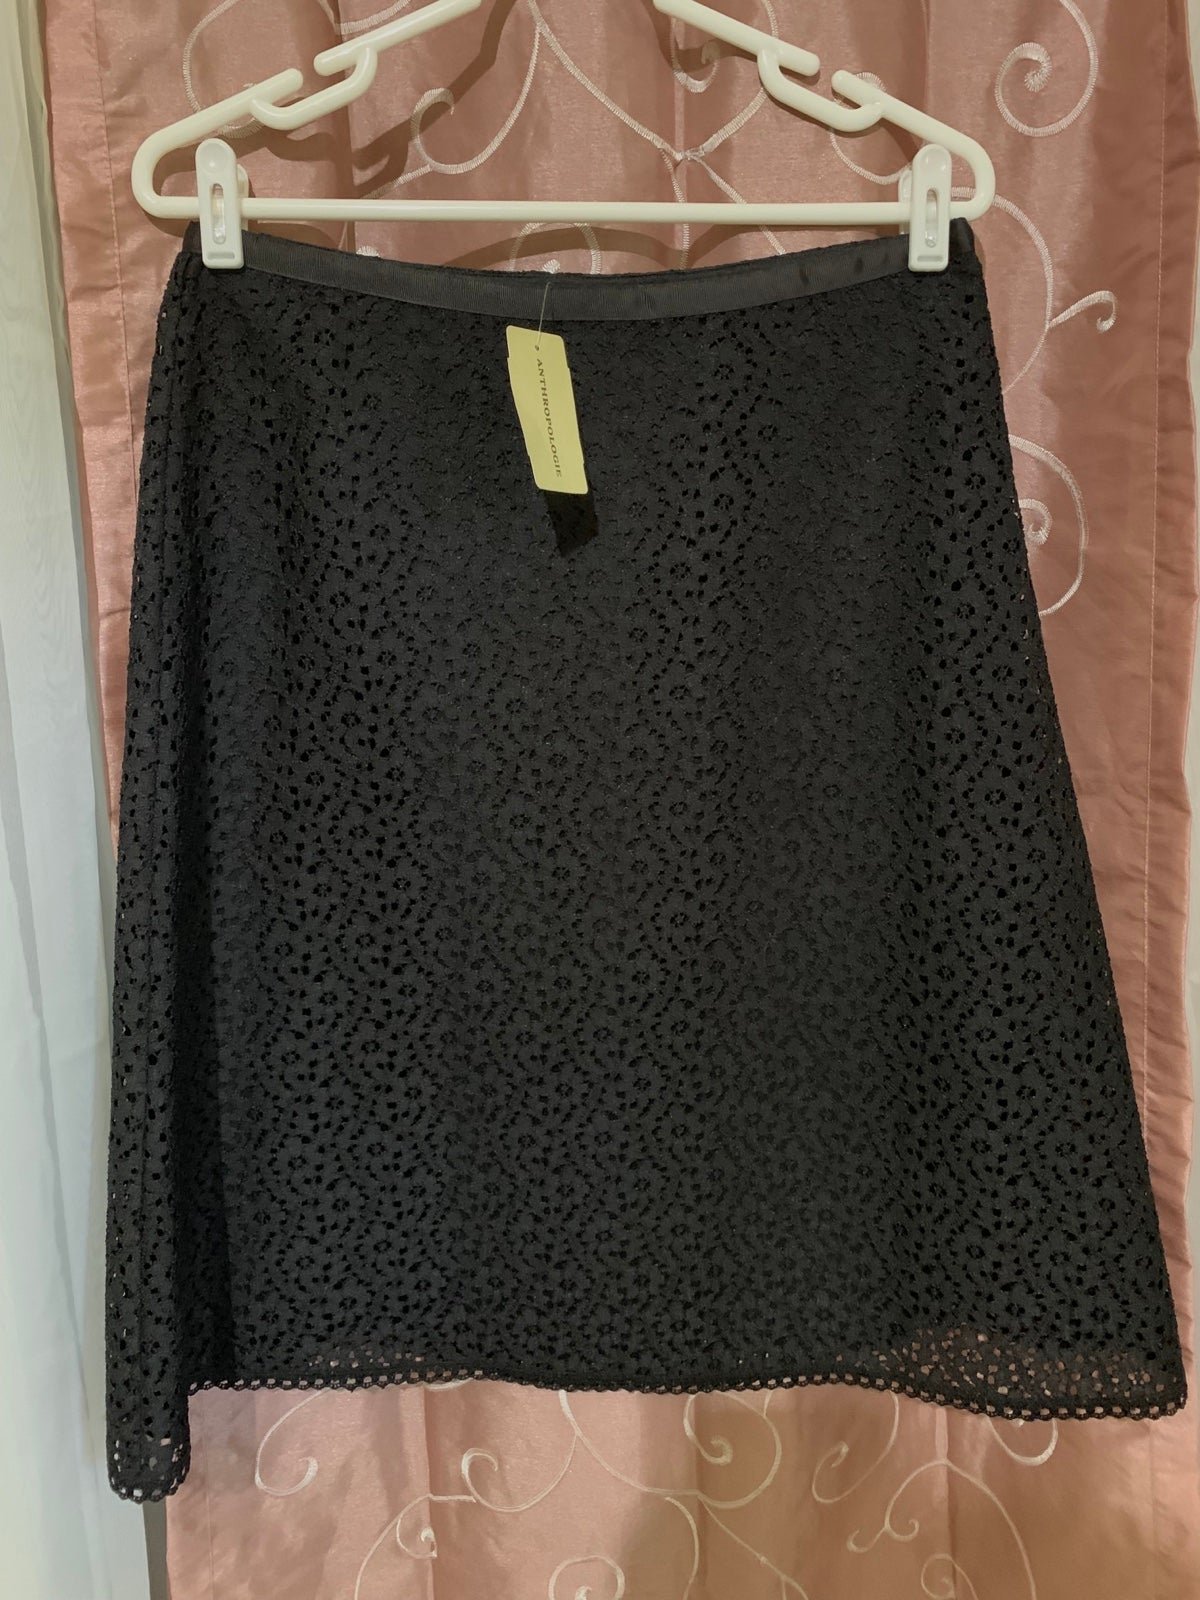 Promotions  Anthropologie Skirt size 8 (NWT) H1SMDIvTE 